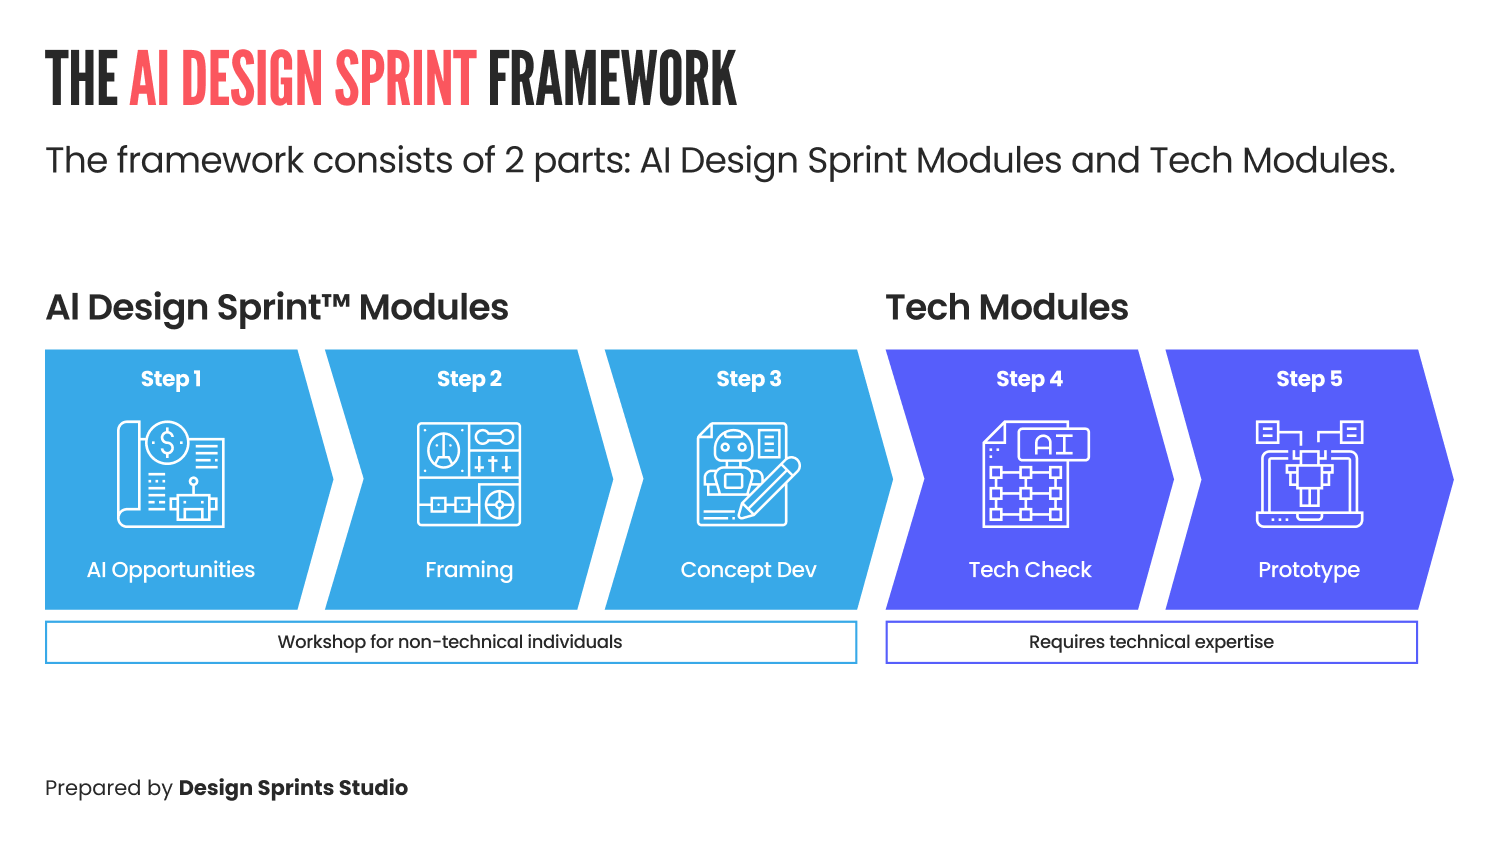 The AI Design Sprint framework consists of two parts